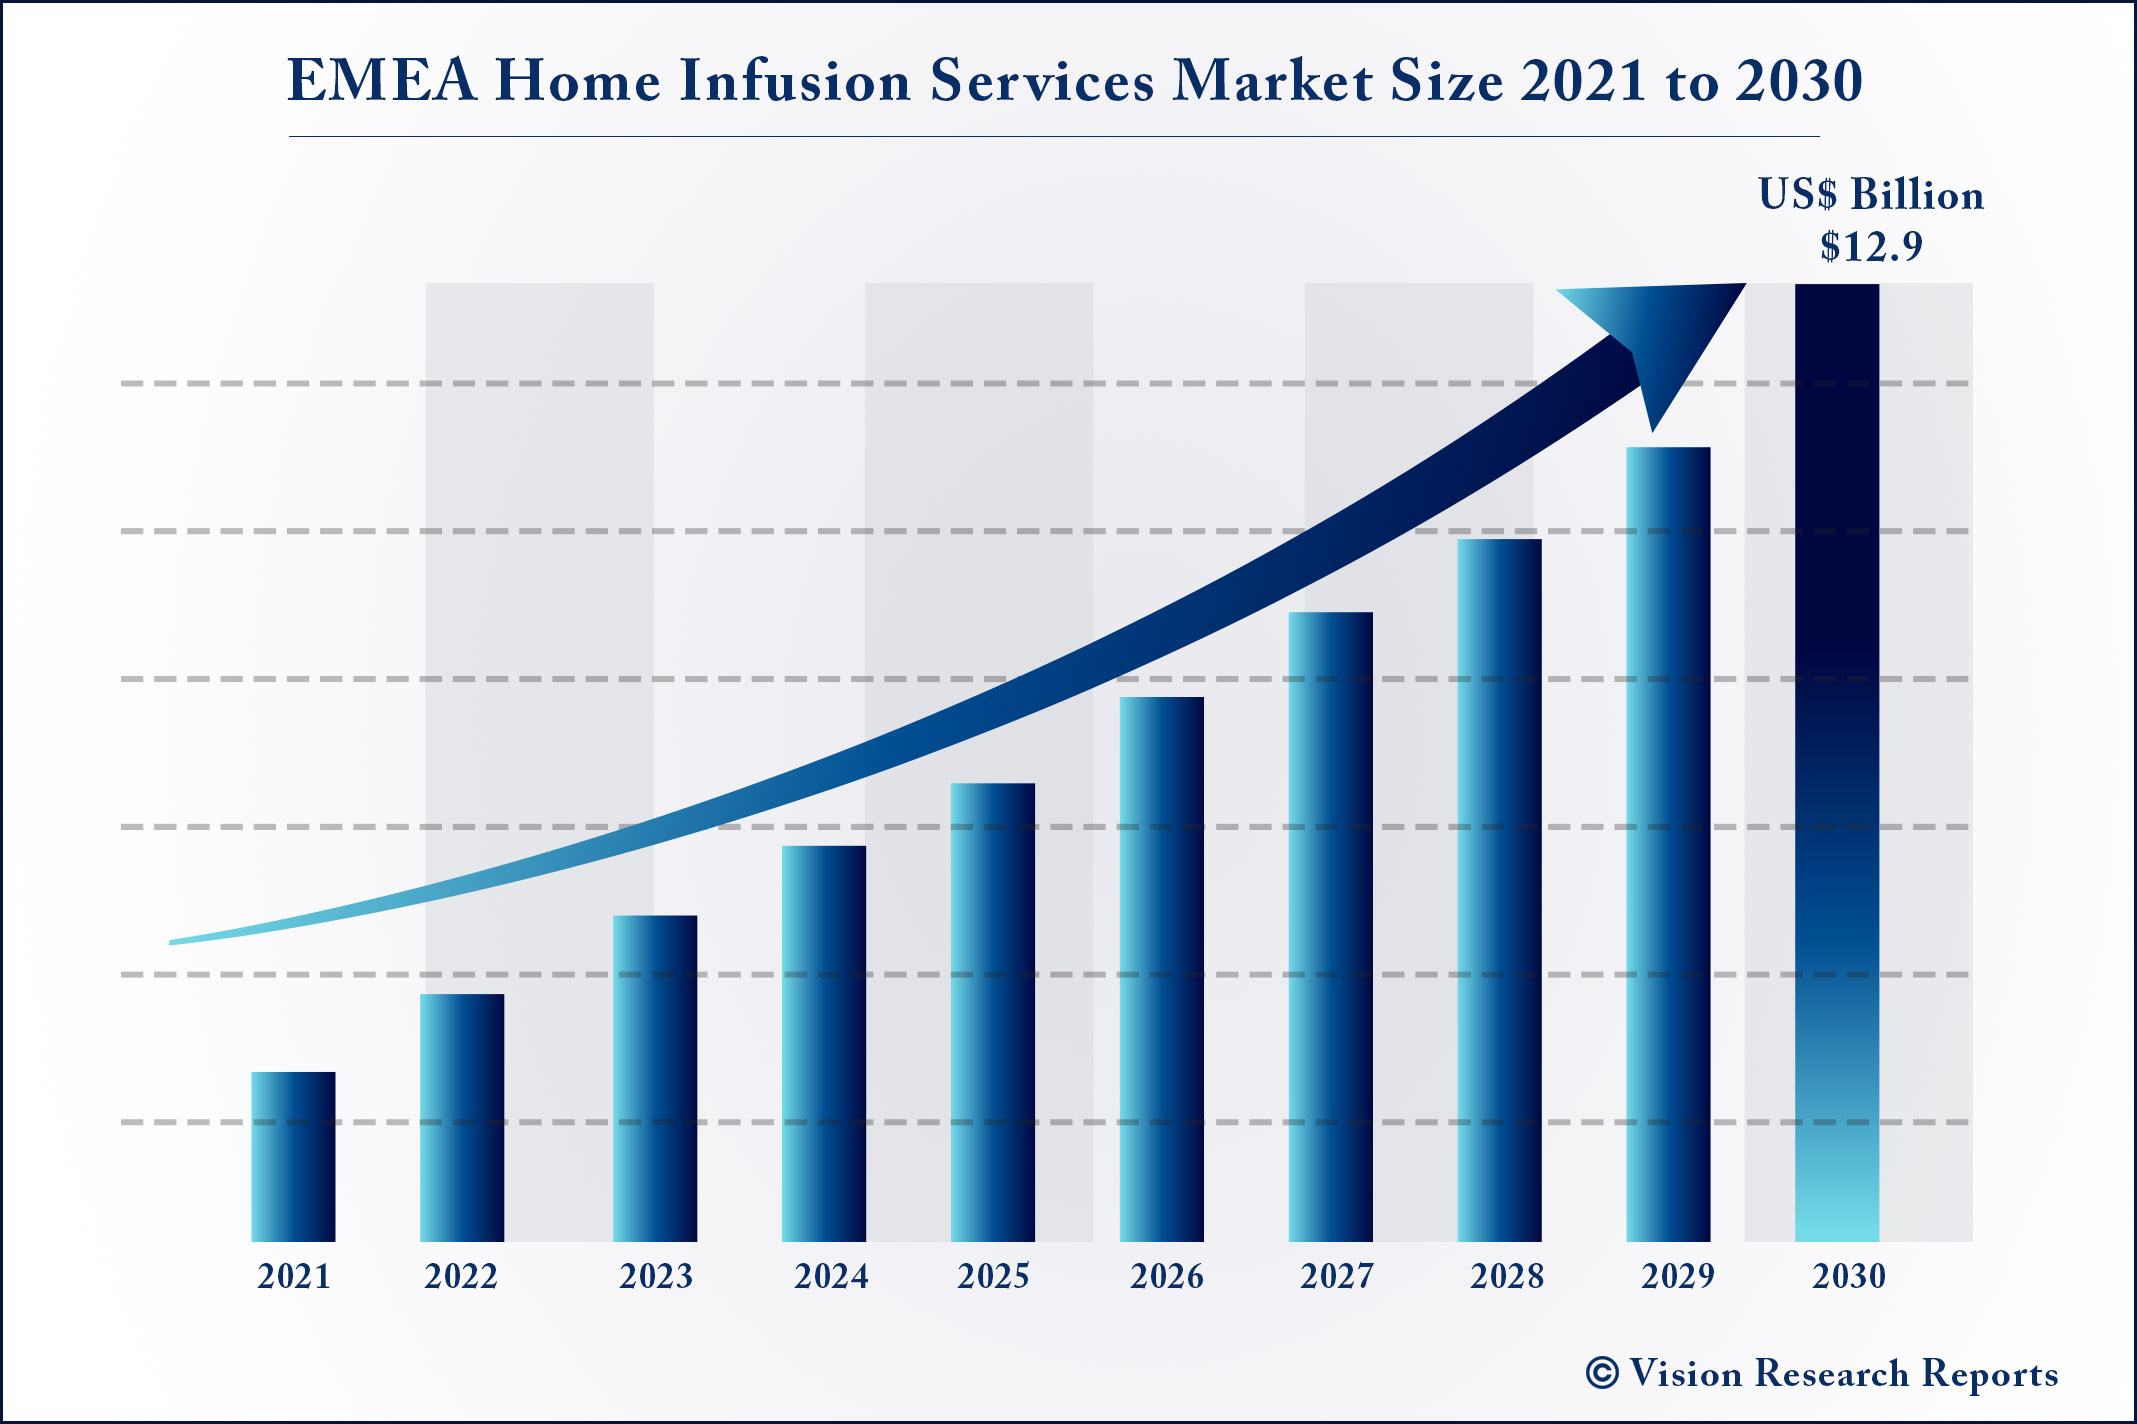 EMEA Home Infusion Services Market Size 2021 to 2030